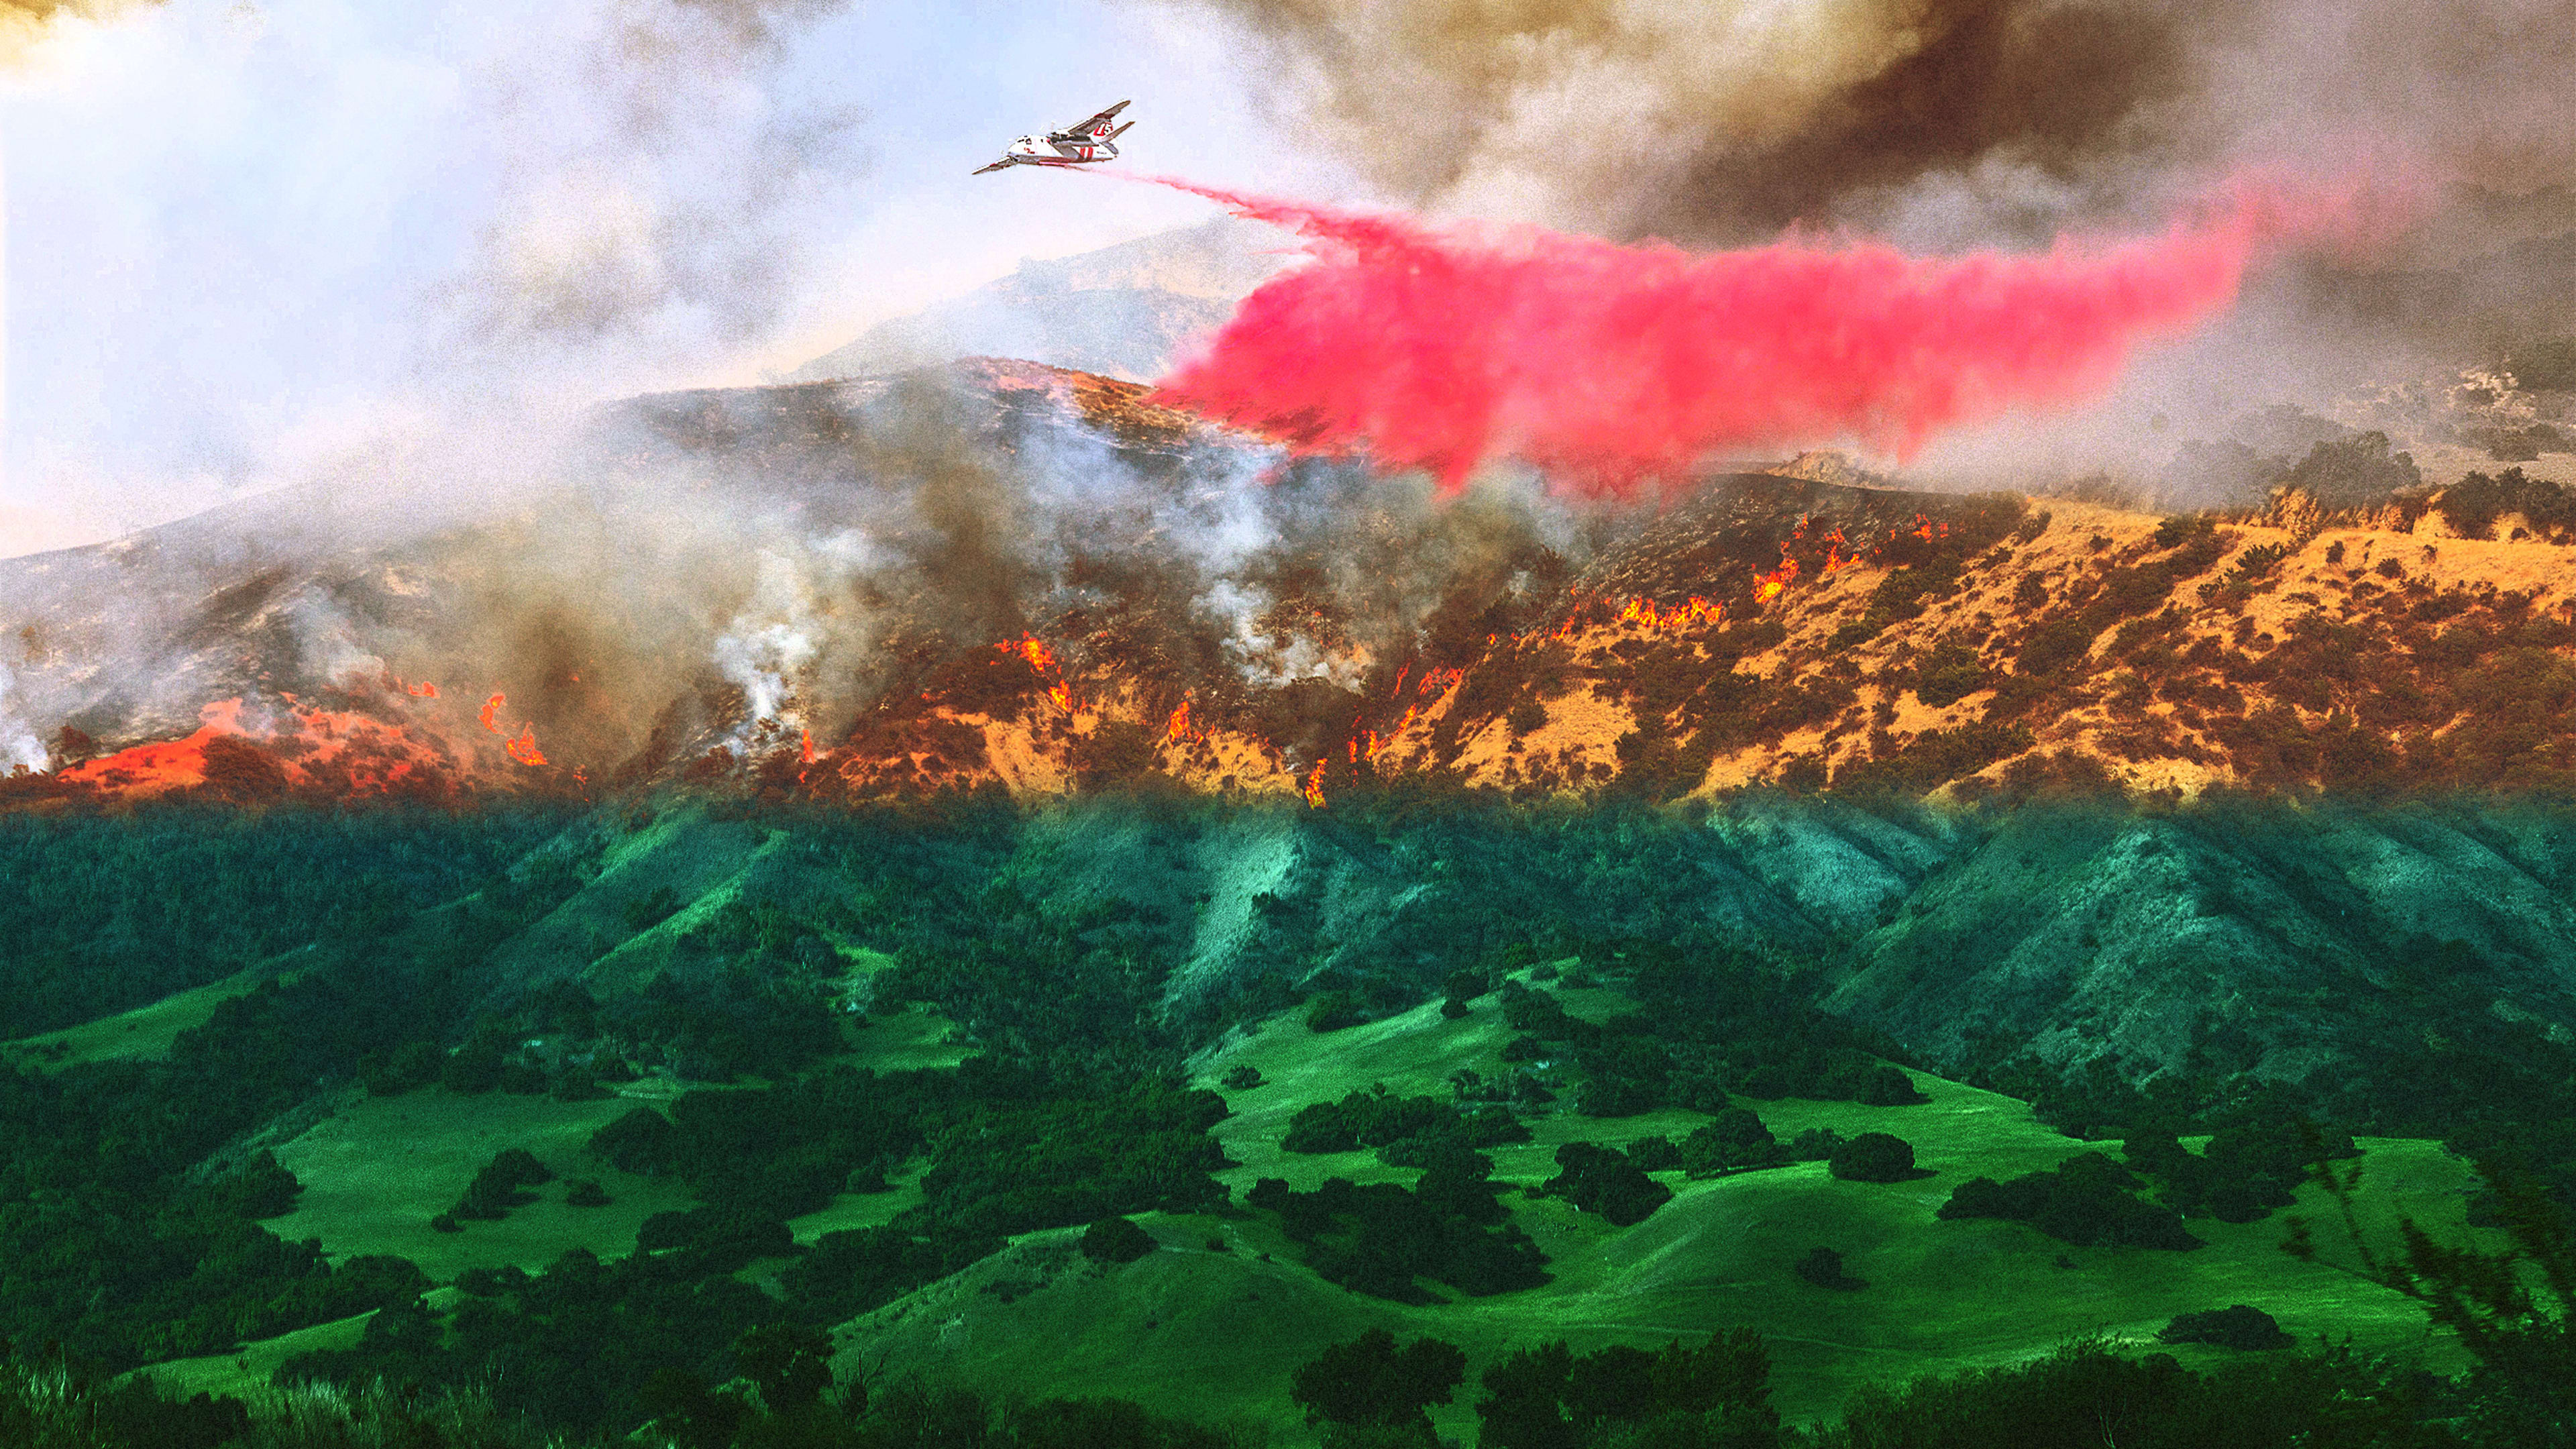 California has had an extraordinarily wet winter. What will that mean for wildfires?